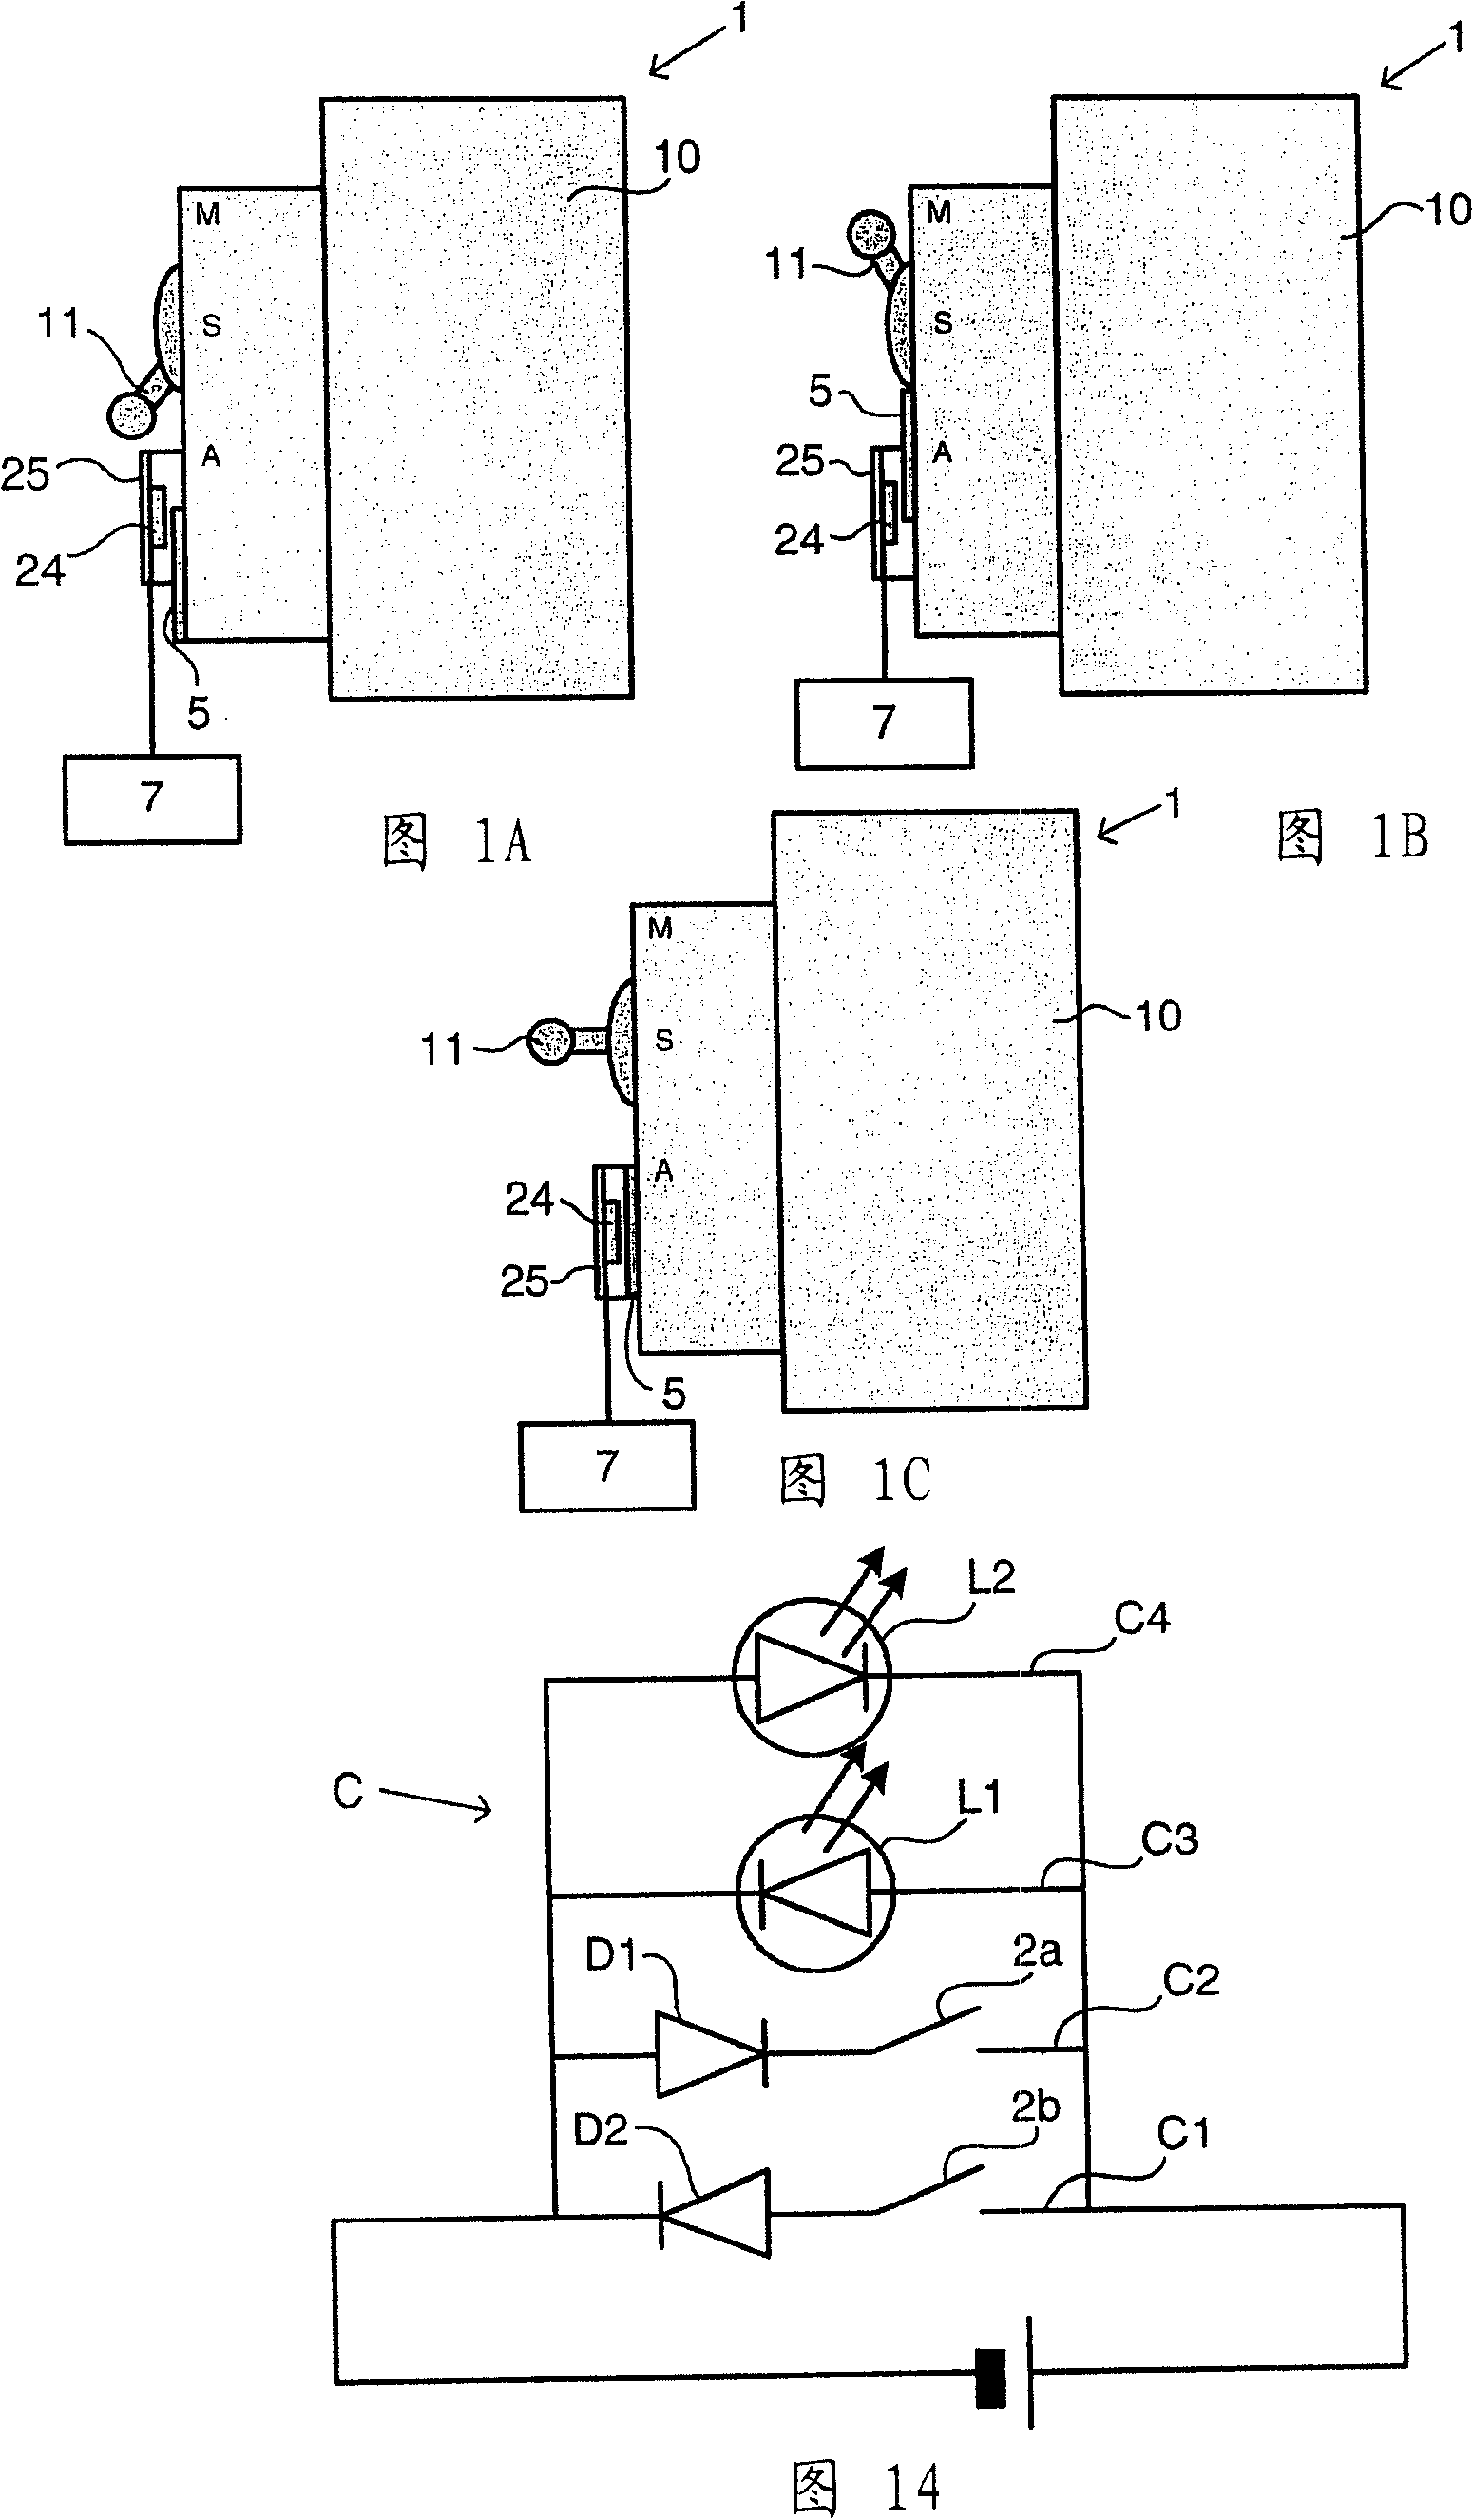 Device for detecting the three states of a circuit breaker